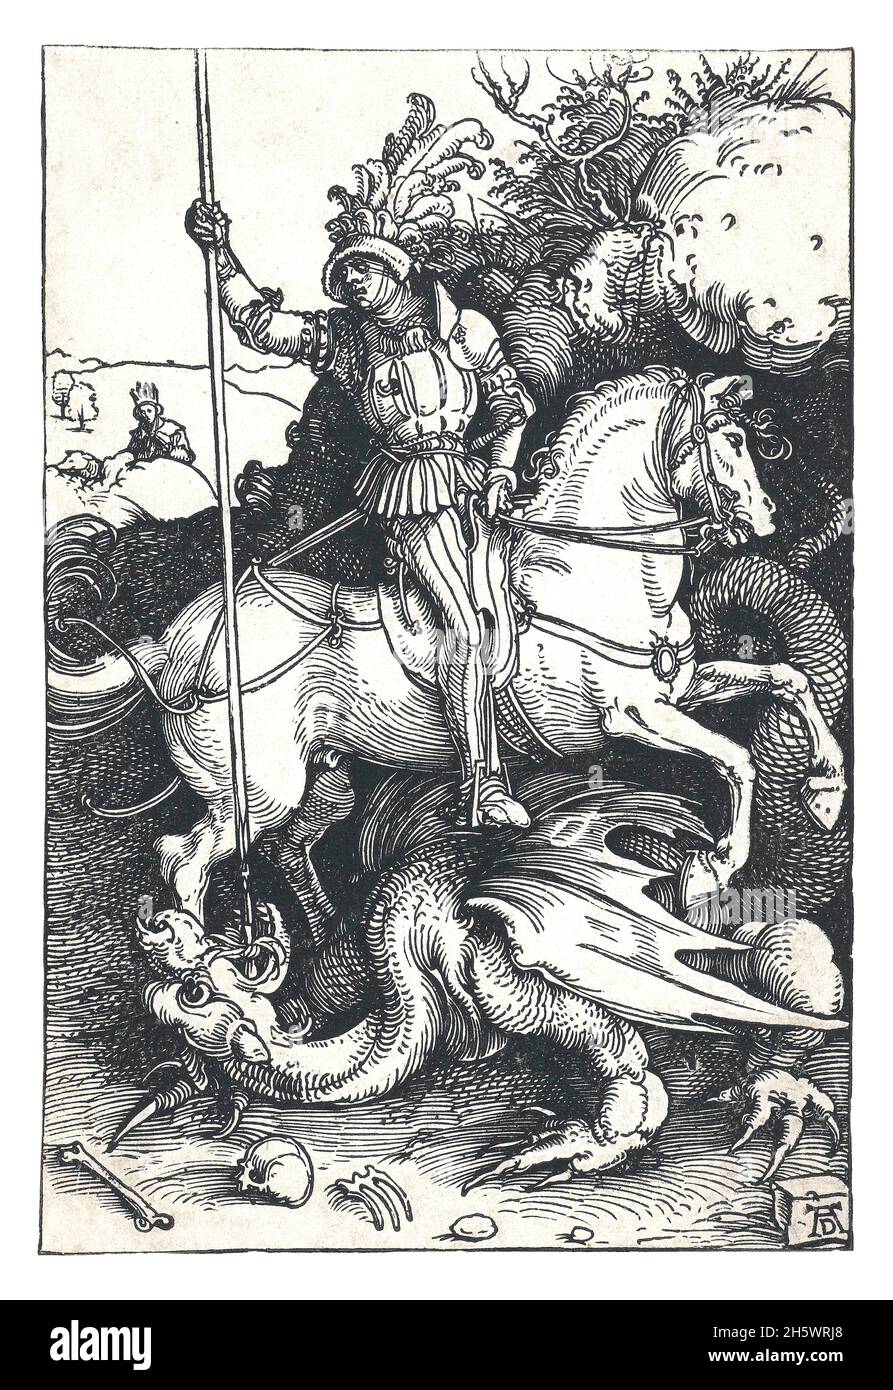 Saint George Slaying the Dragon The influence exerted by the emerging Renaissance art affected the depiction of Saint George. If the saint was usually represented as a knight in armour at the end of the 15th century, his costume took on classic Roman features in the 16th century.  An optimised and enhanced digital version of an historical print. Stock Photo